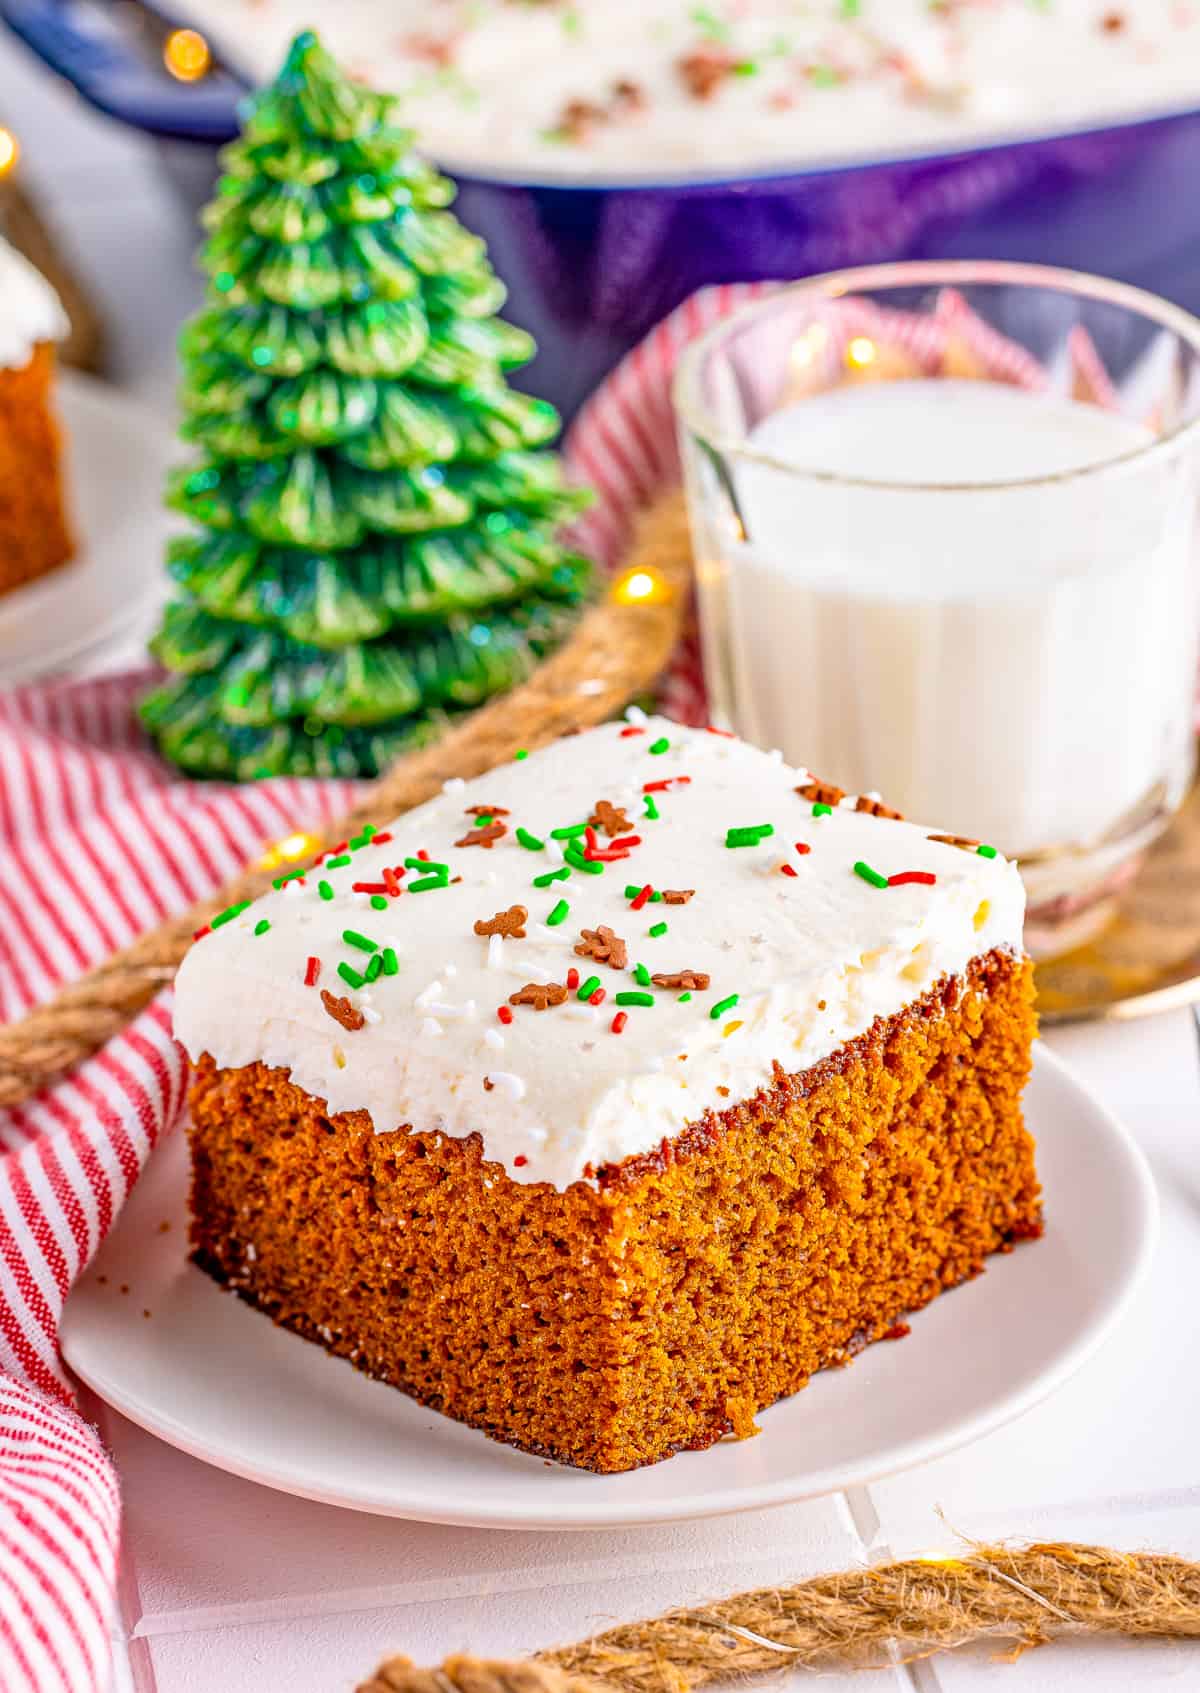 Slice of Gingerbread Cake on white plate with milk behind it.